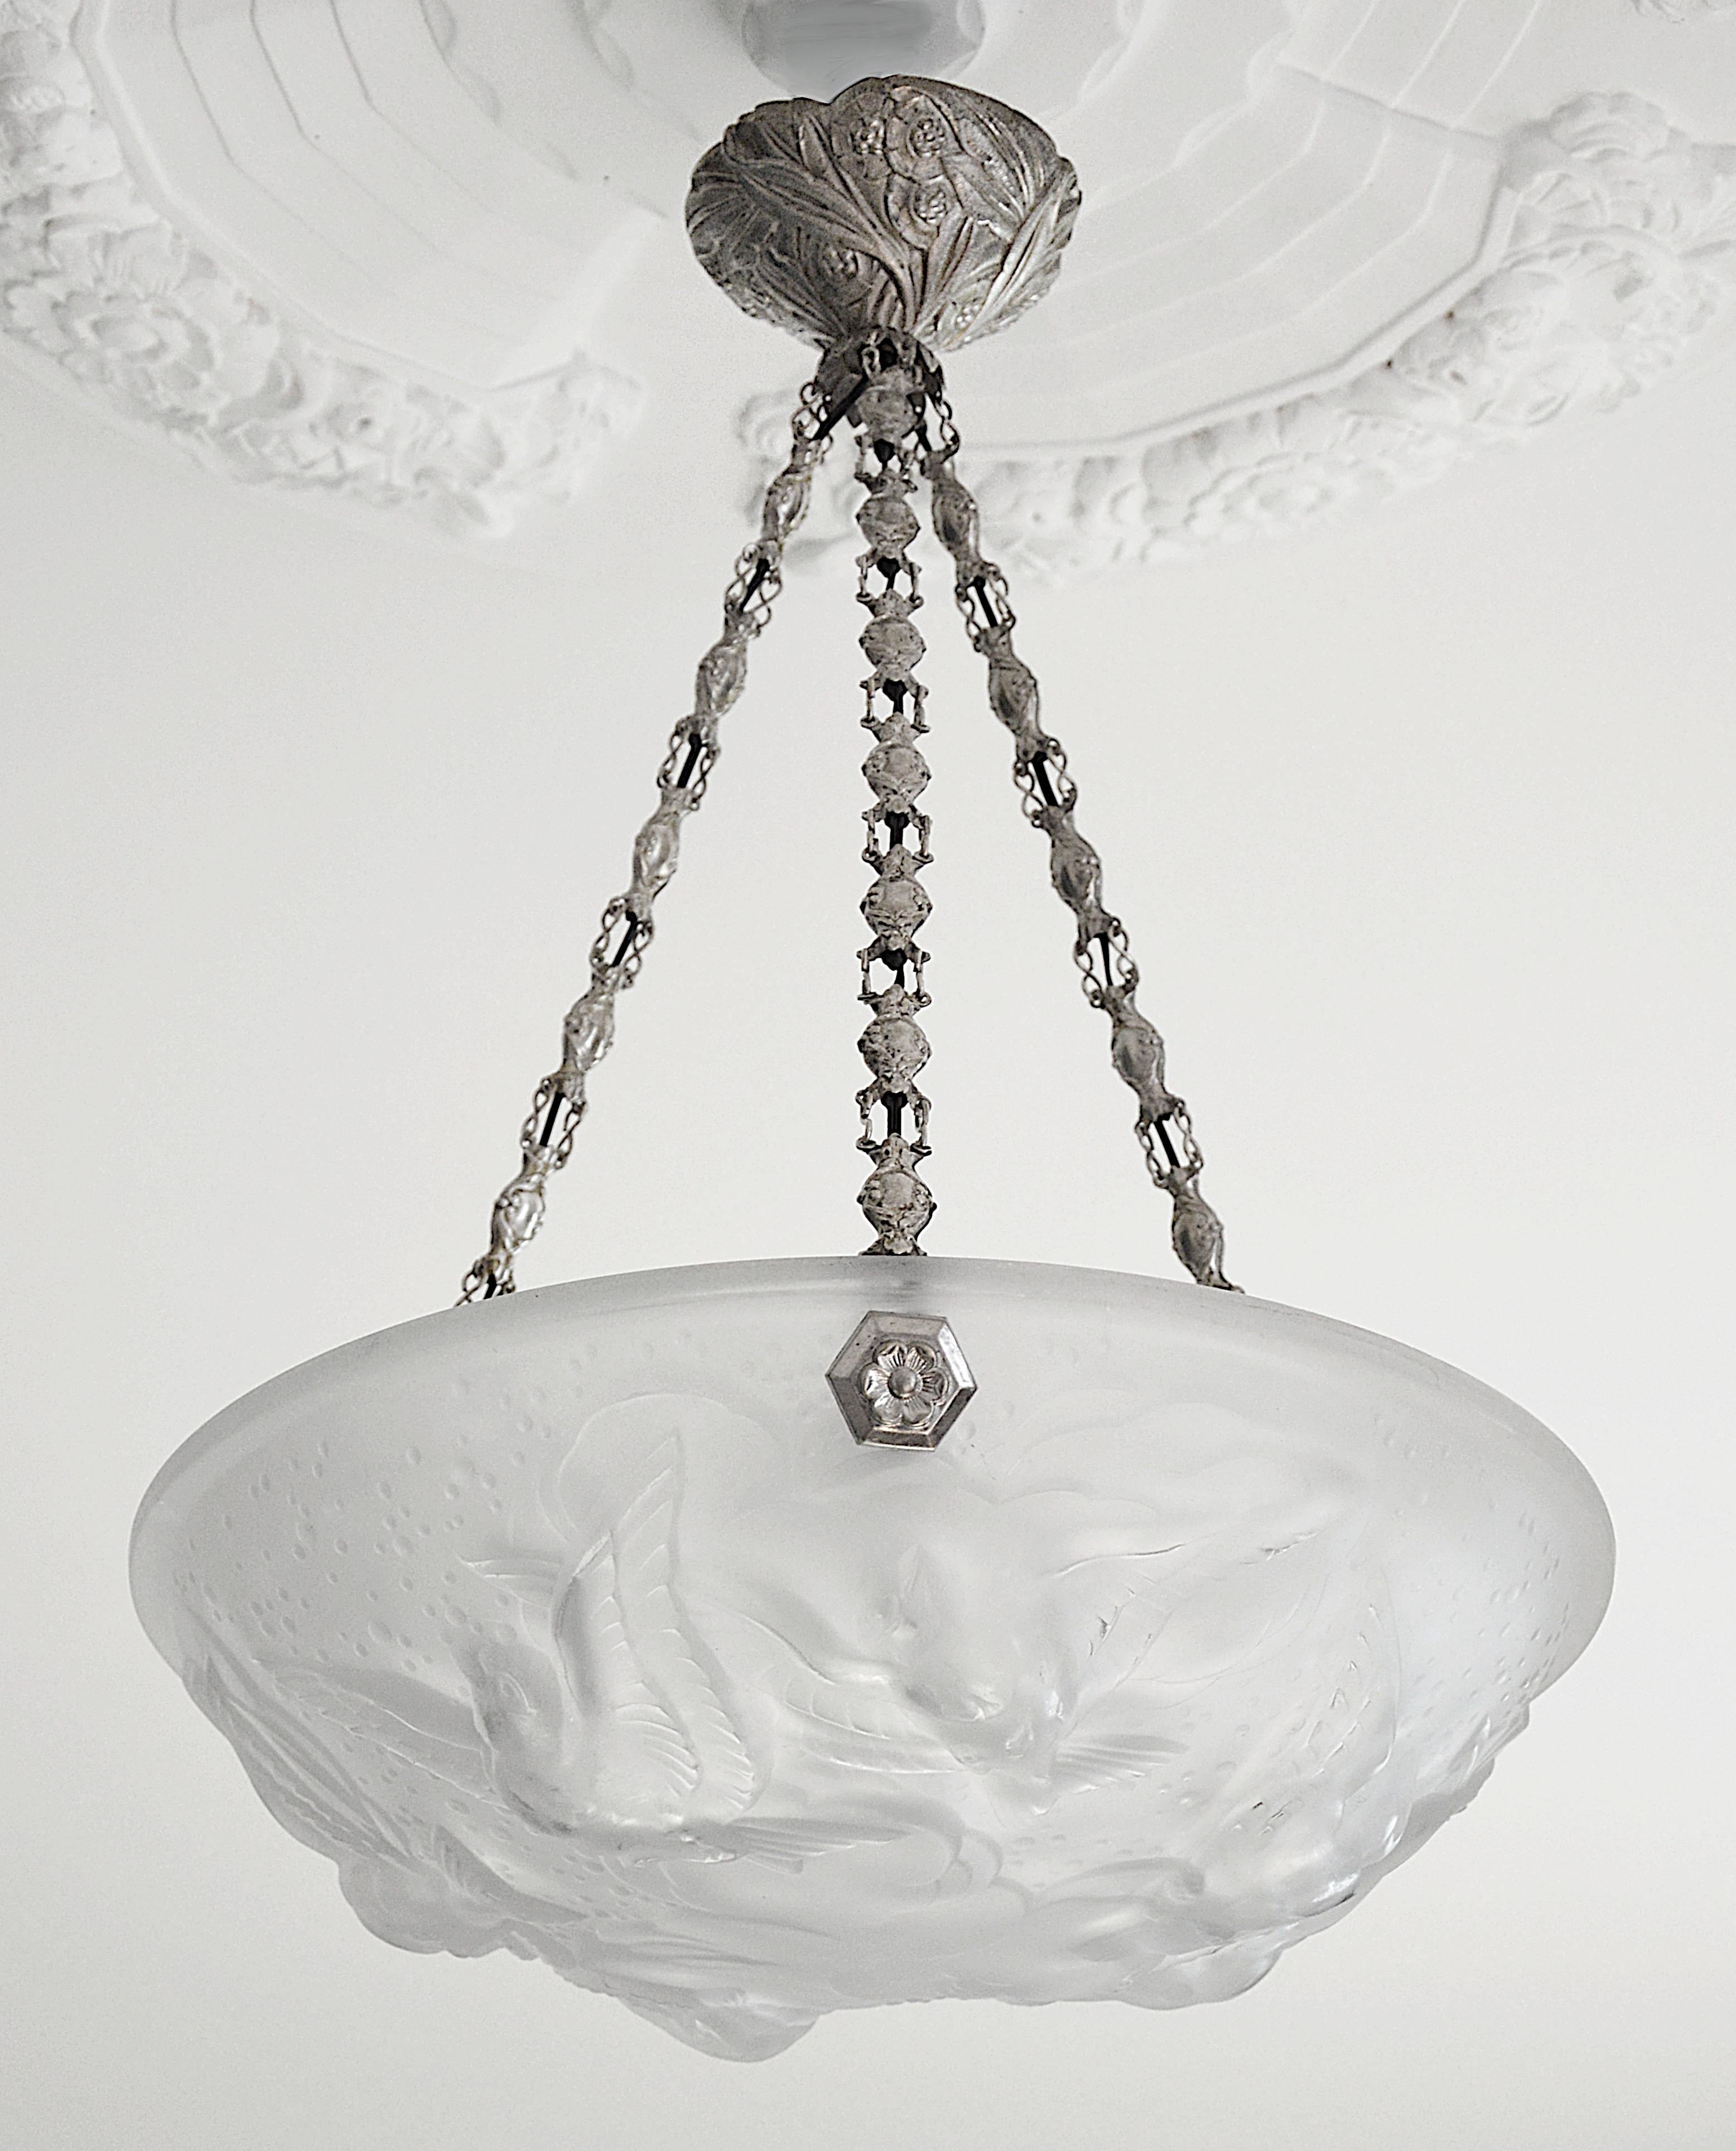 French Art Deco pendant chandelier by Muller Freres (Luneville), France, 1920s. White frosted molded-pressed glass shade showing 6 swallows in the sky. It comes with its nice period silverplated bronze and stamped brass (links) fixture. Height